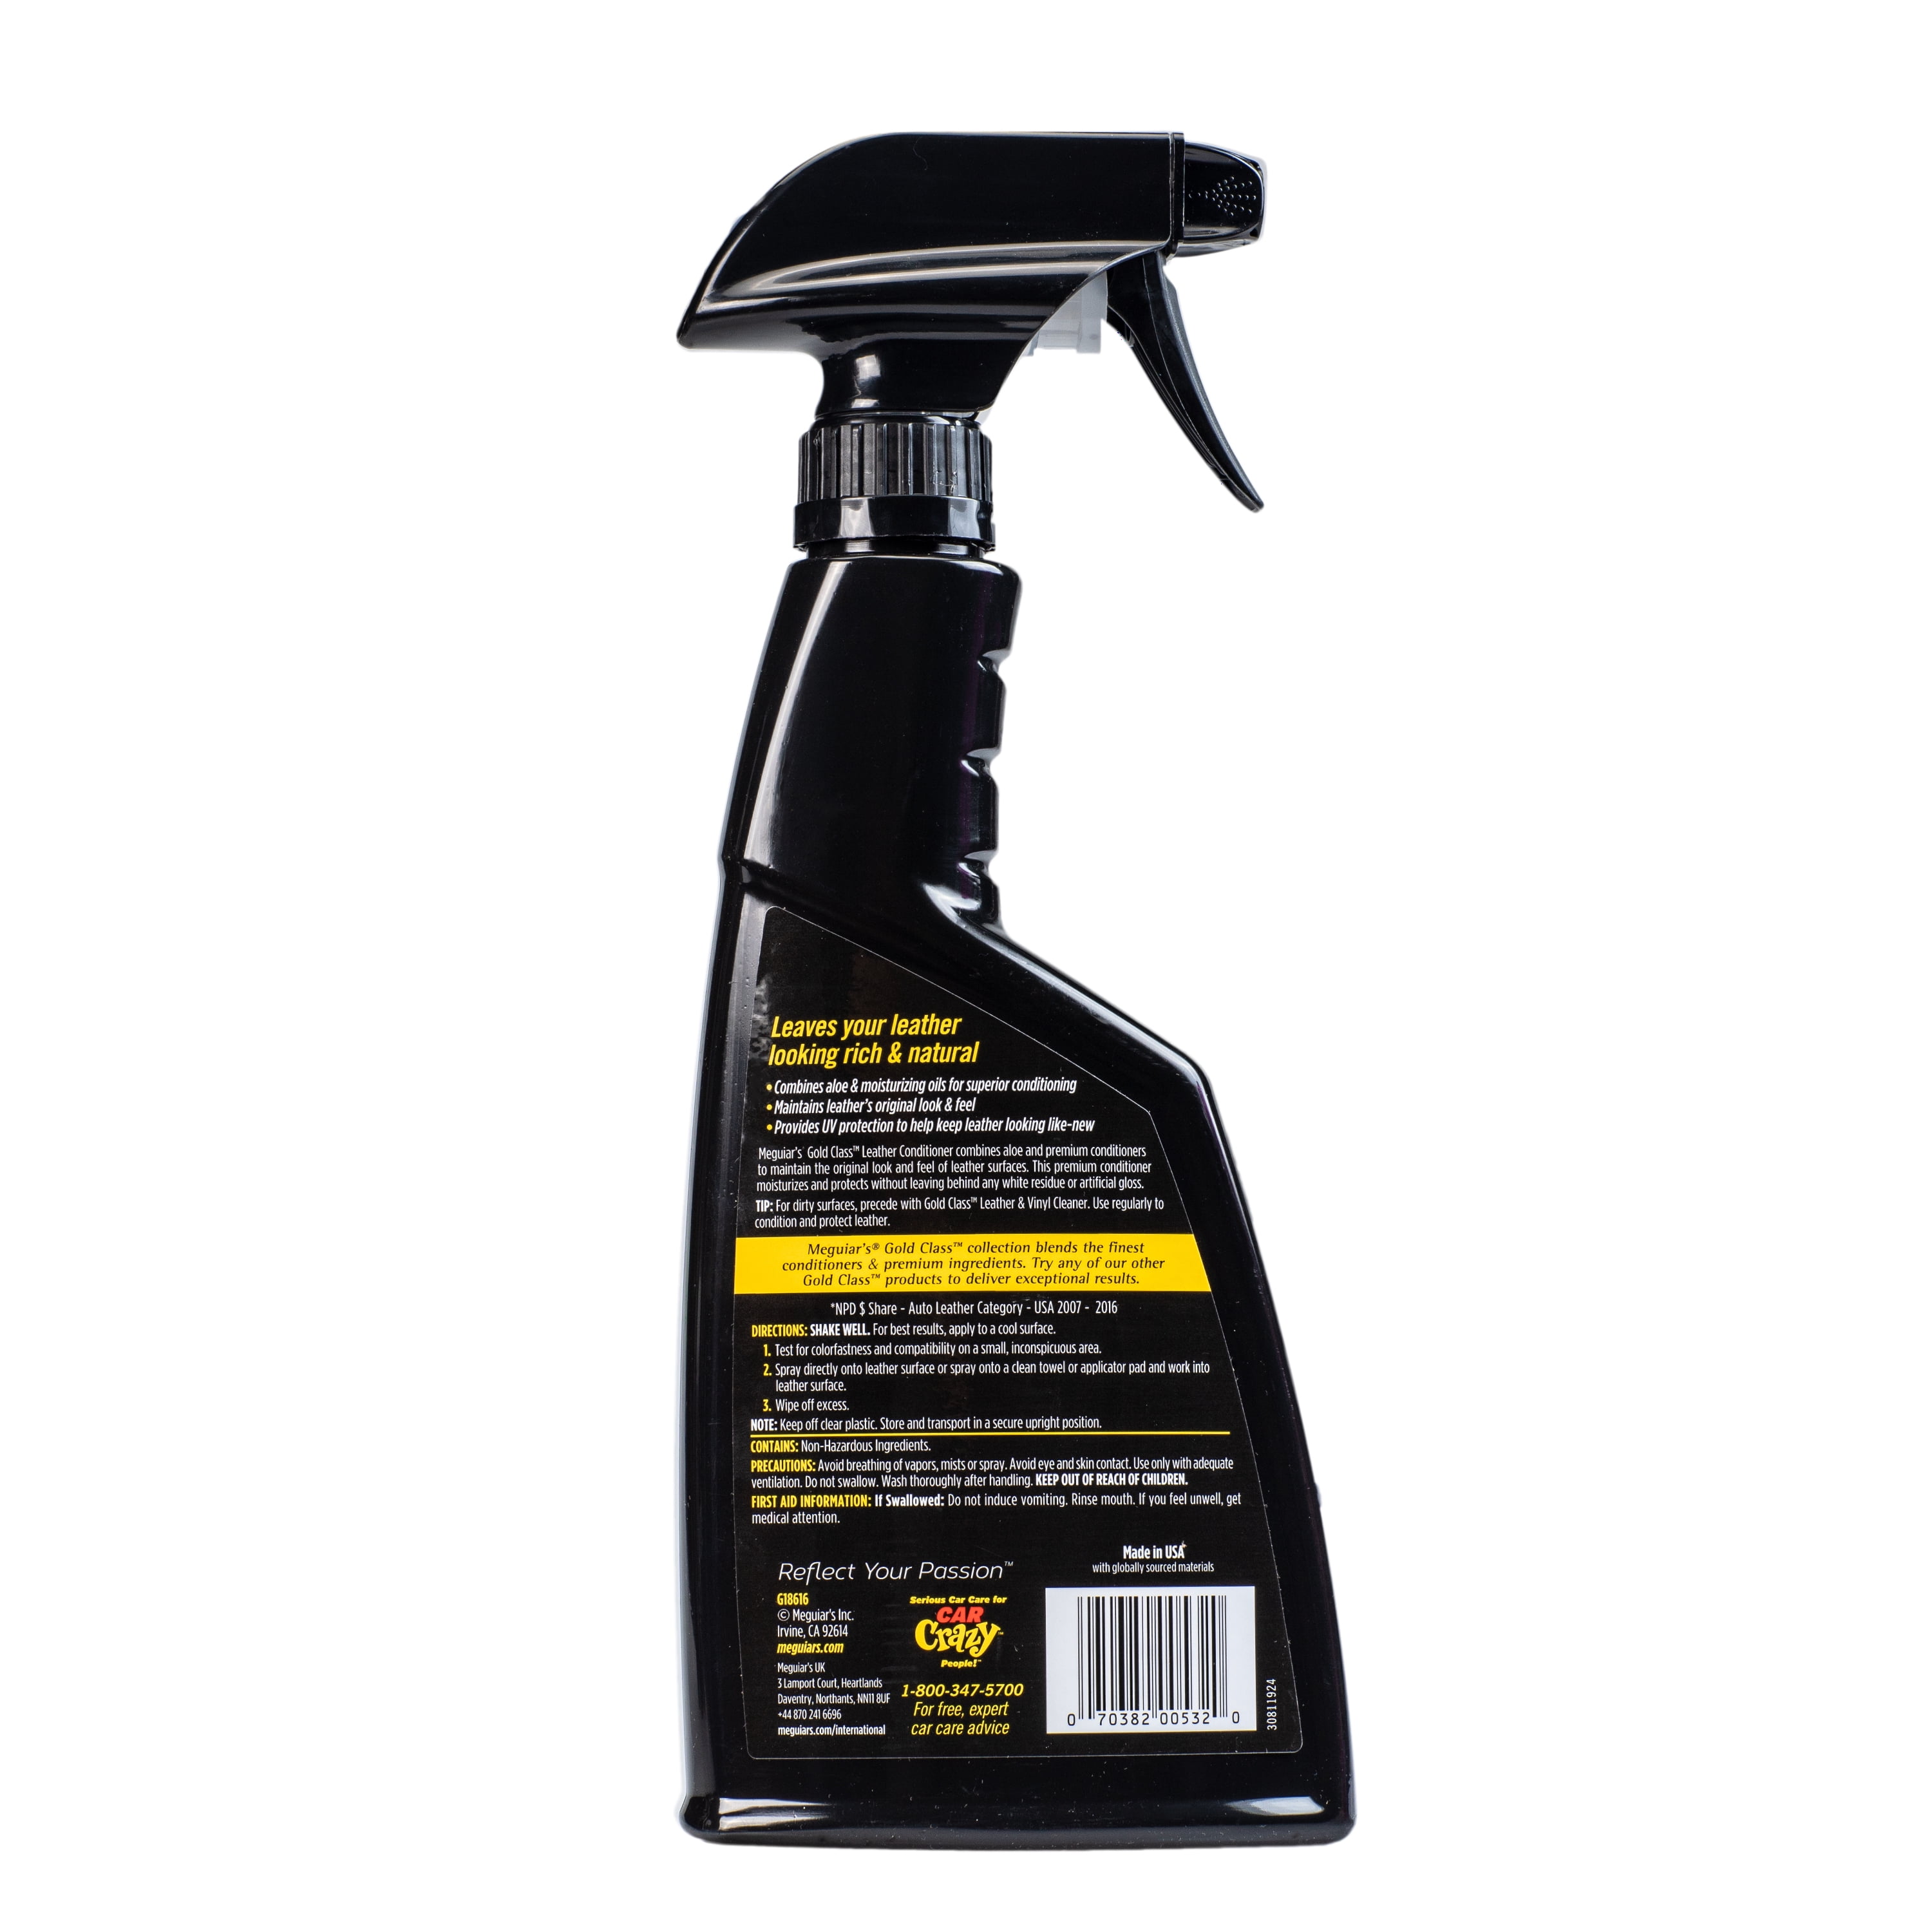 2-Pk) Meguiar's GOLD CLASS Leather Conditioner Moisturizer with UV  Protection